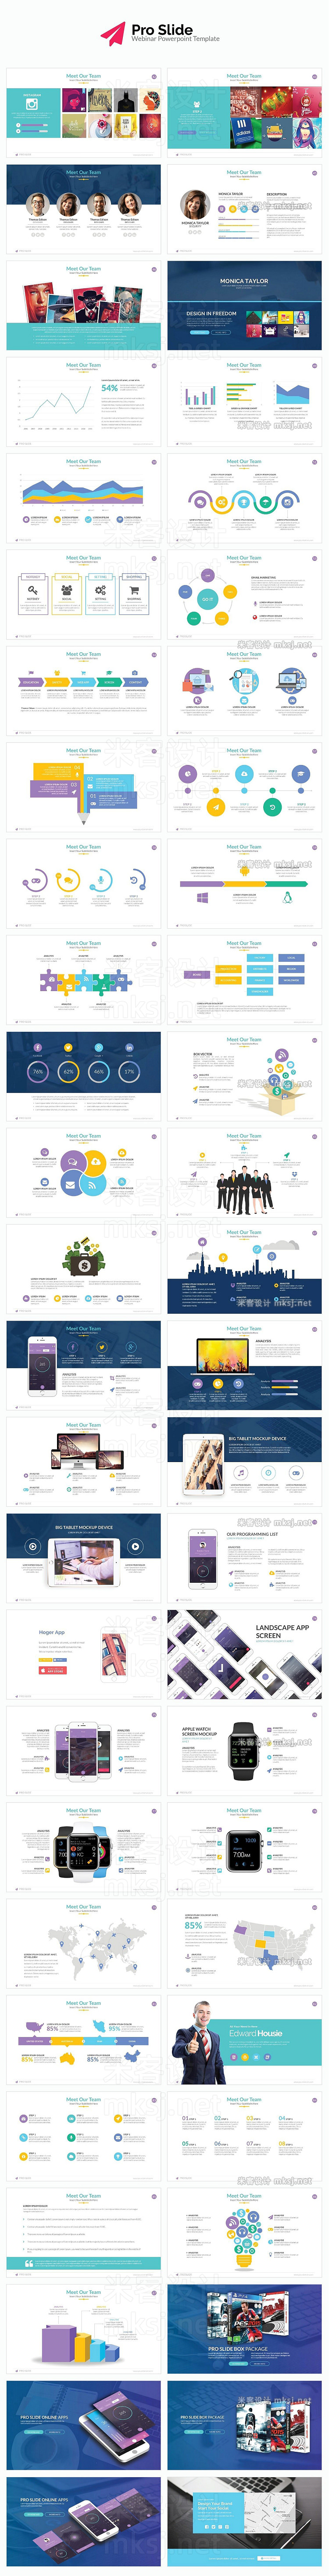 PPT模板 12 in 1 Business Powerpoint Bundle